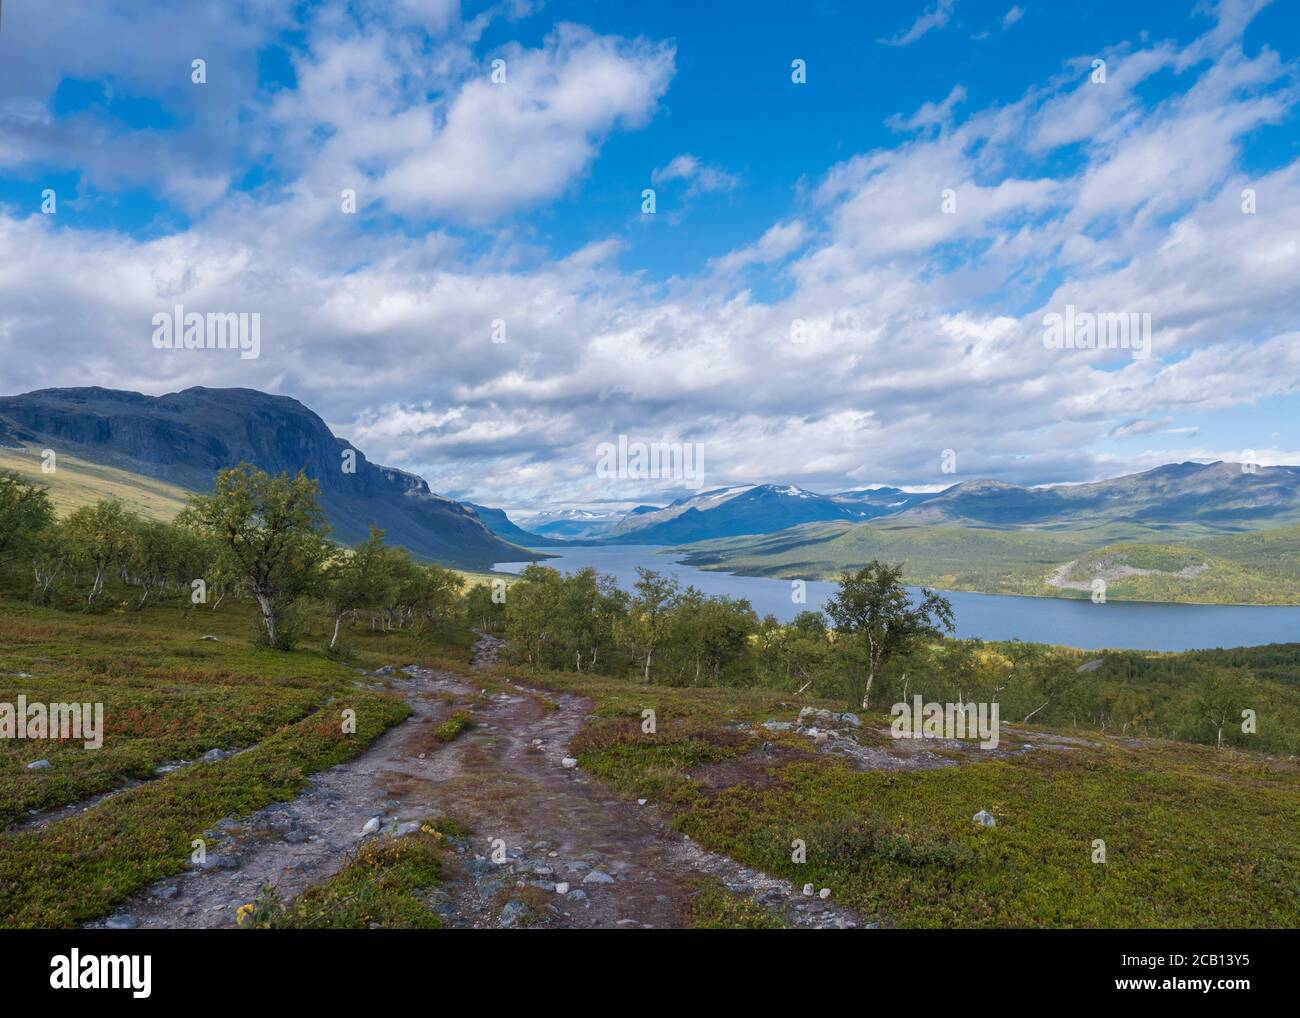 Lapland landscape with beautiful river Lulealven, snow capped mountain, birch tree and footpath of Kungsleden hiking trail near Saltoluokta, north of Stock Photo